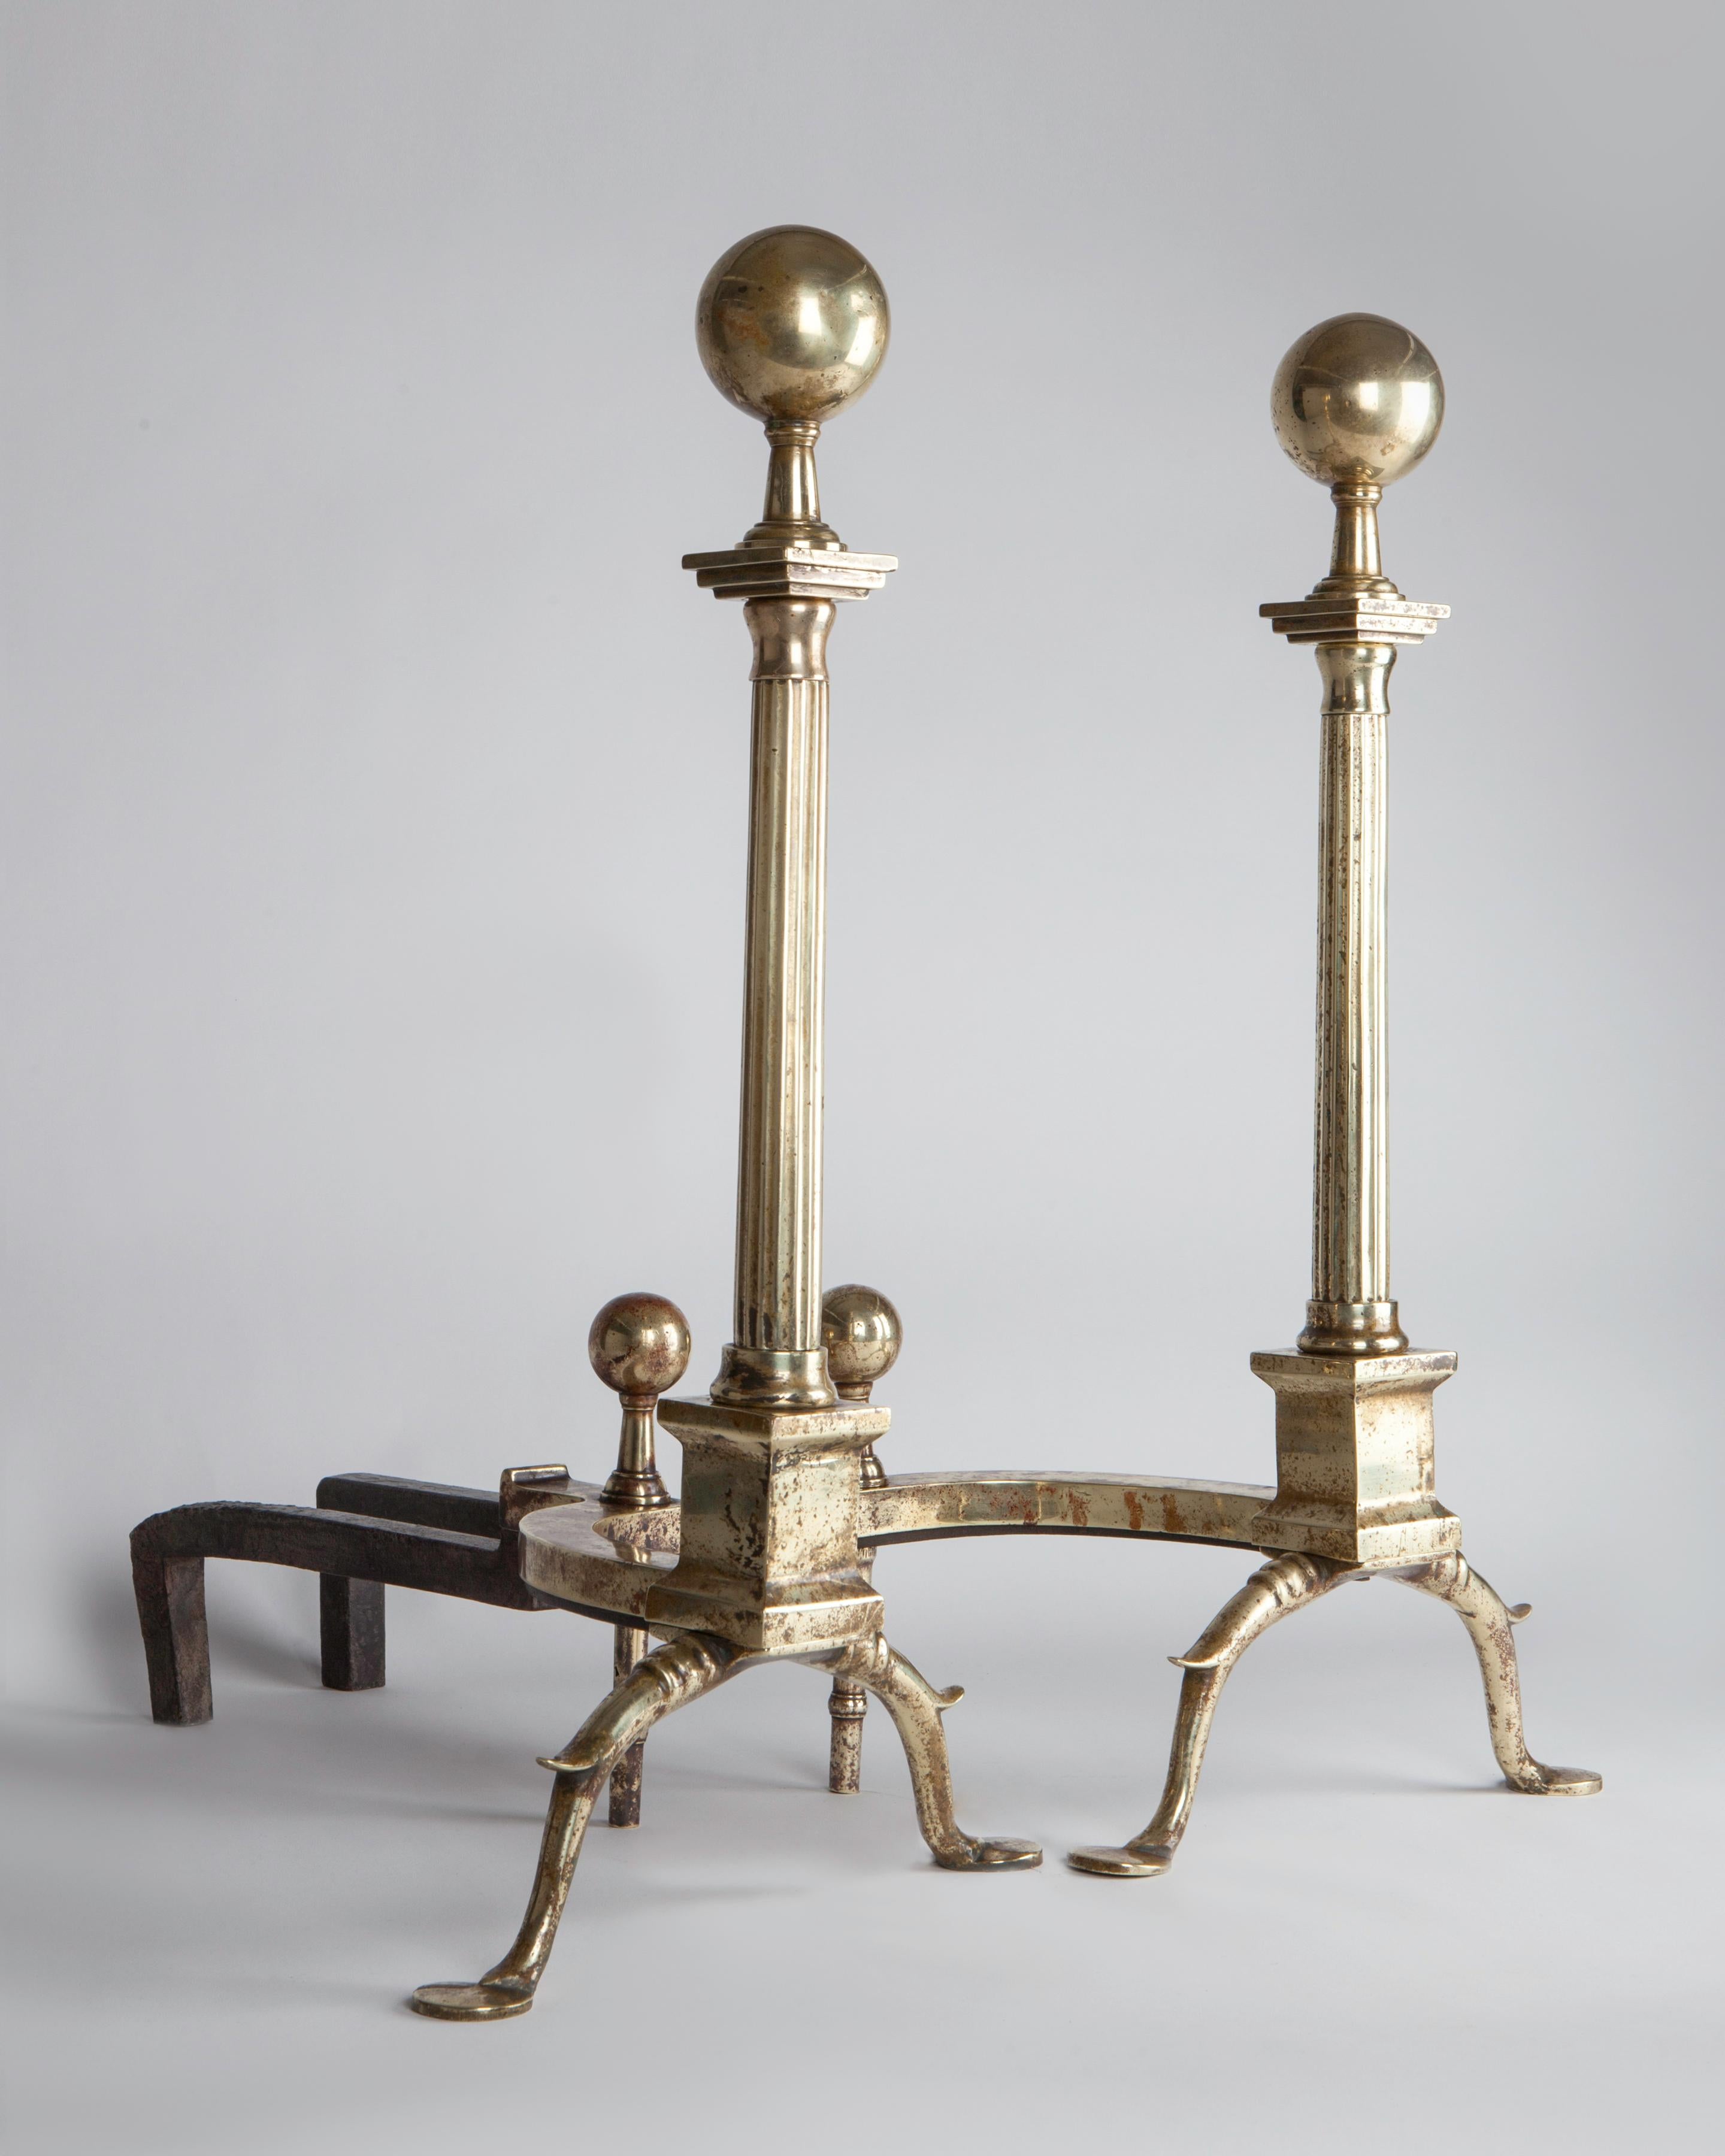 Forged Early 20th Century Neoclassical Polished Brass Andirons With Fluted Columns For Sale